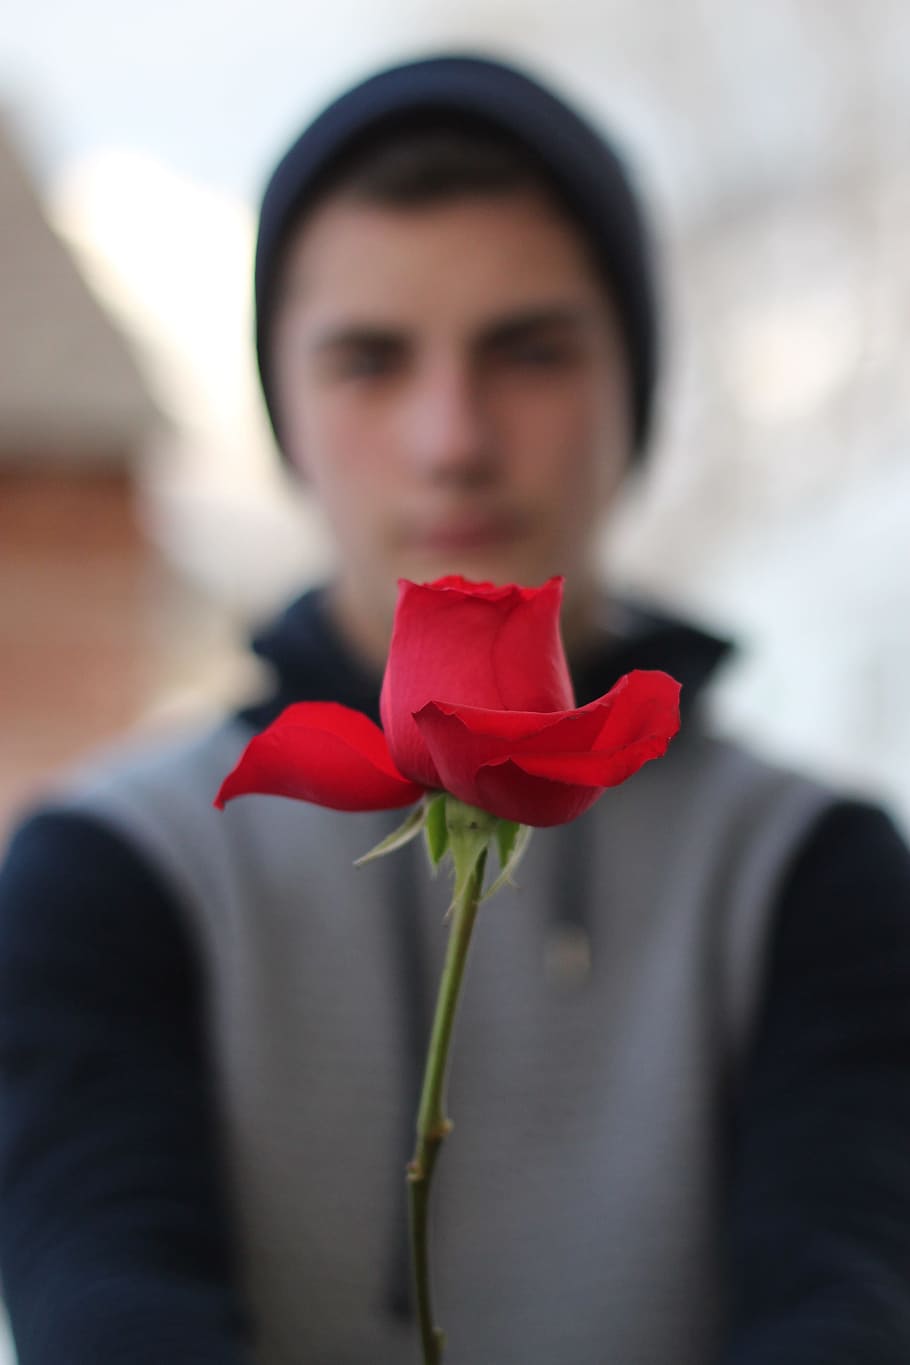 Love, Valentine, Male, rose, young, gift, in love, flower, red, rose - flower